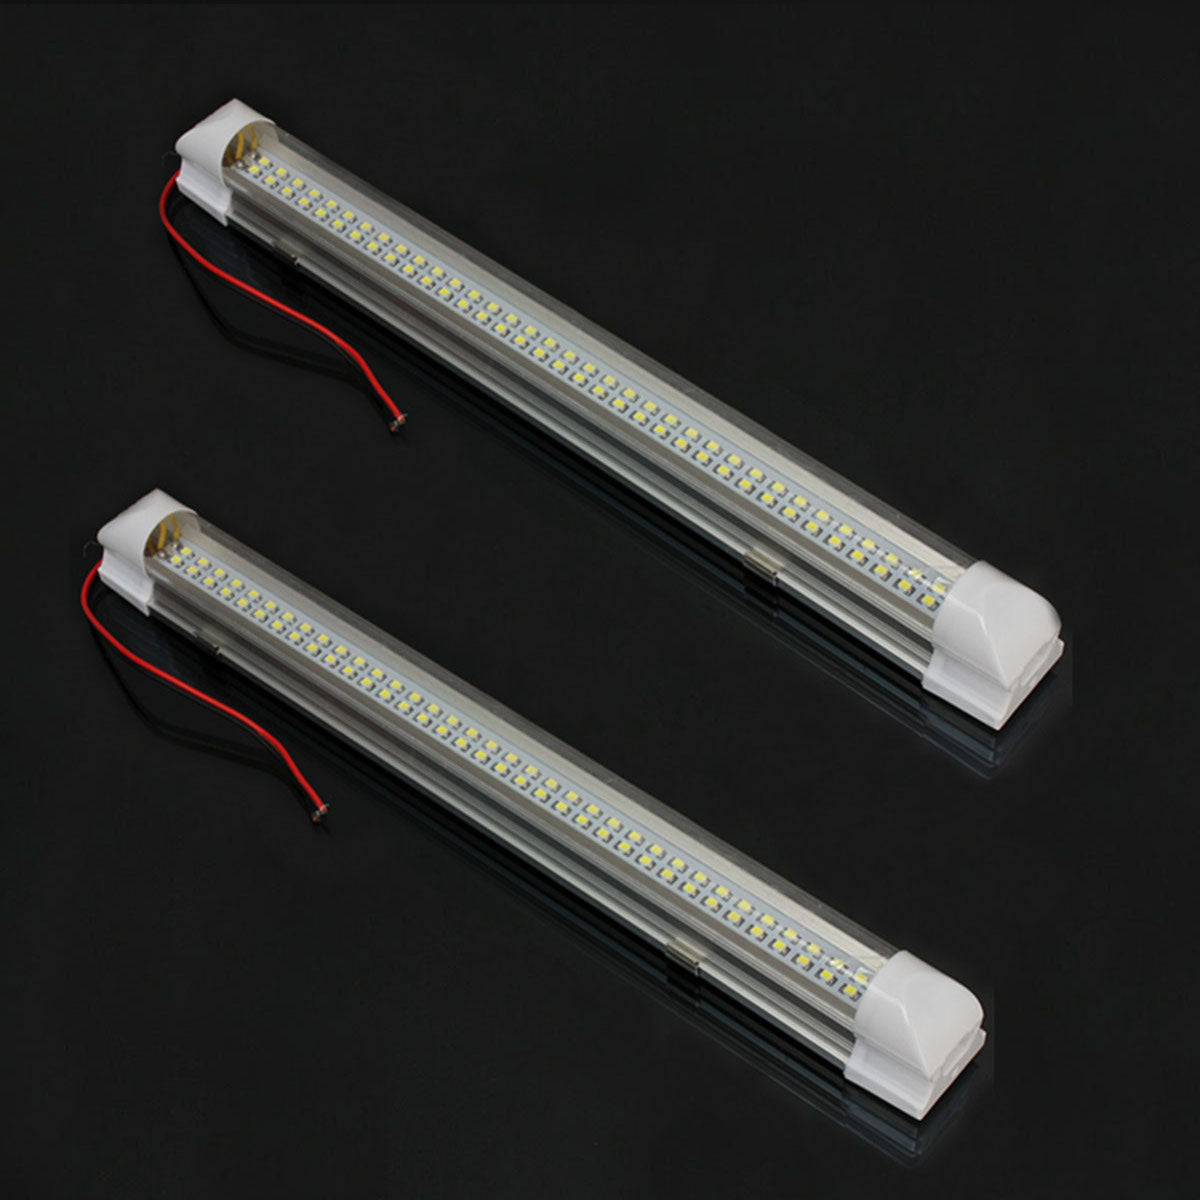 Dark Gray Universal Interior 34cm LED Light Strip Lamp White 2Pcs with ON/OFF Switch for Car Auto Caravan Bus